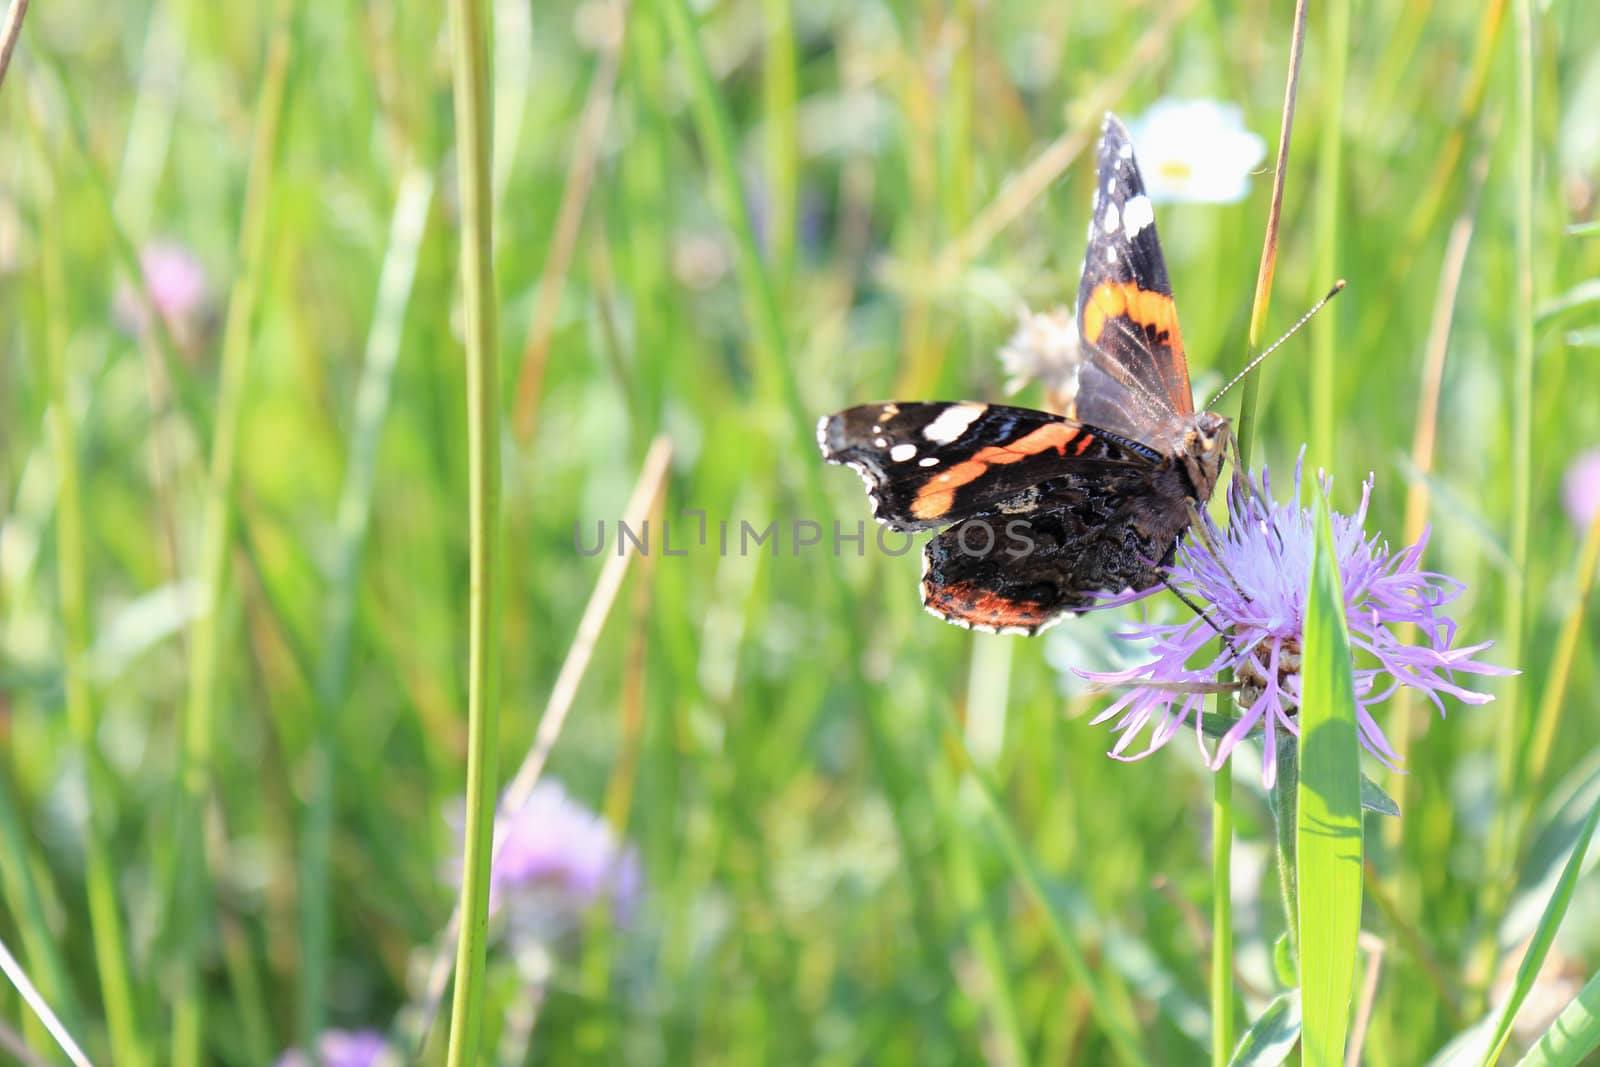 The butterfly sitting on a flower, in the sunny august day